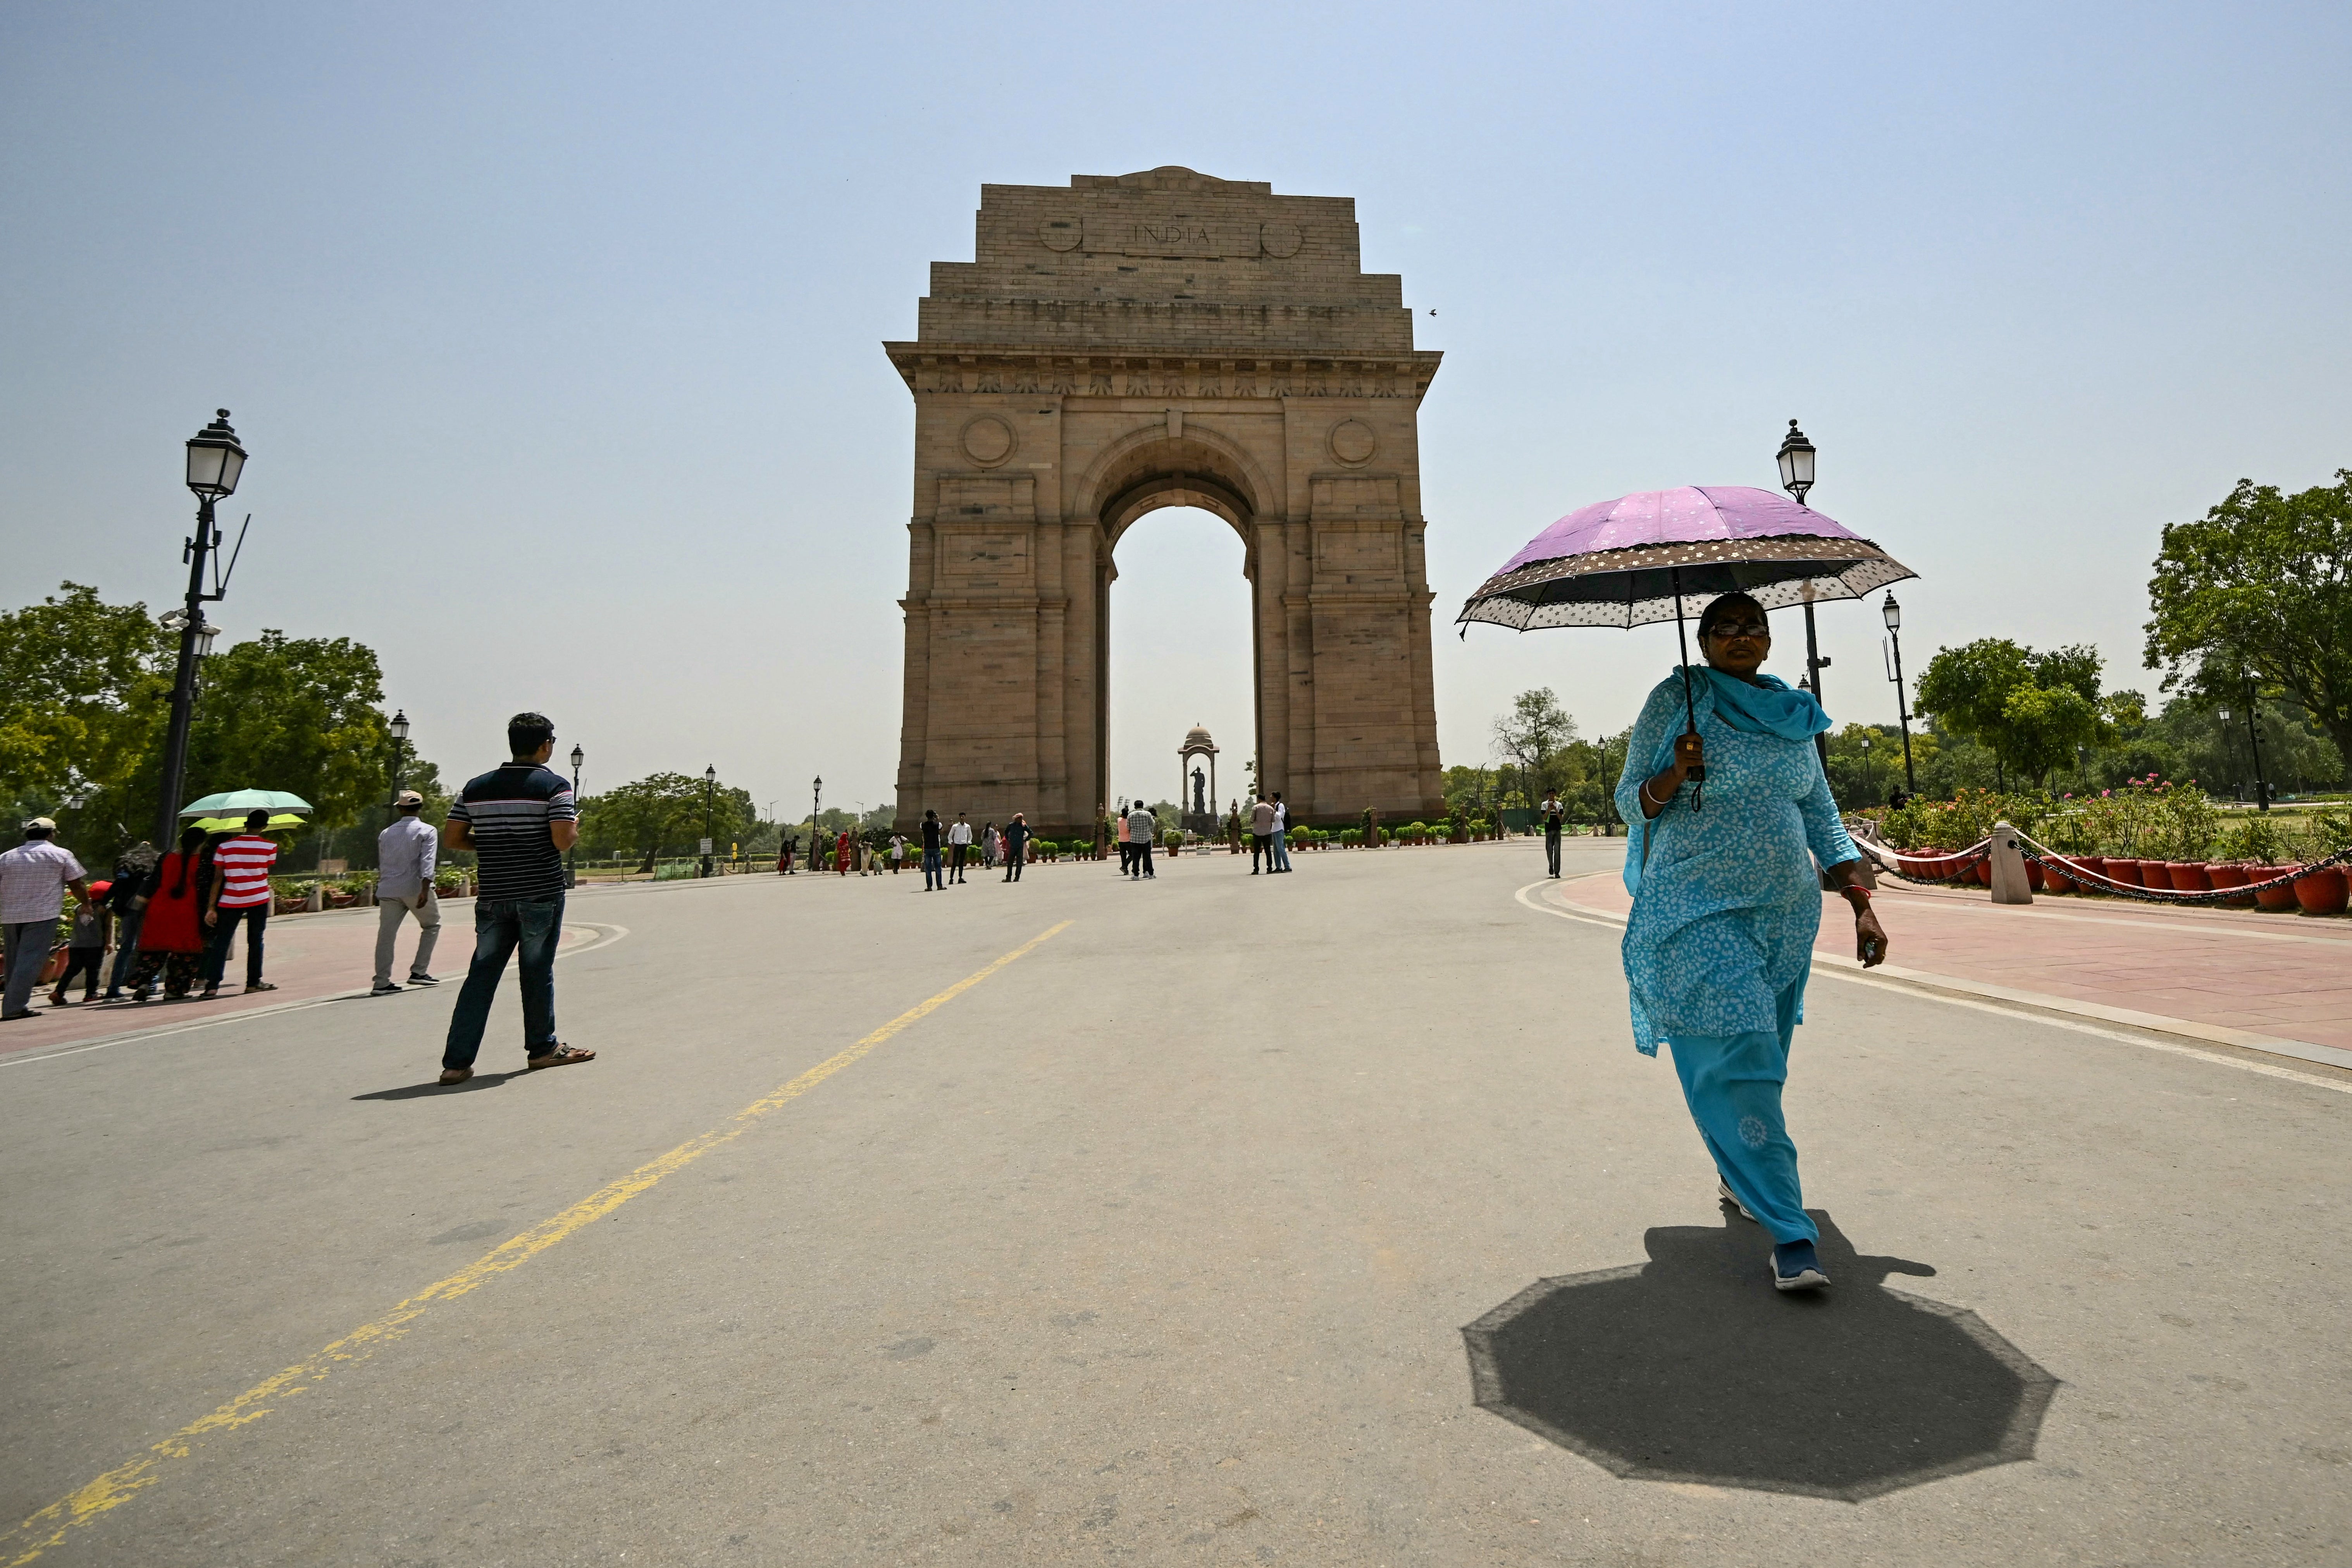 A woman holding an umbrella walks near the India Gate during severe heatwave on a hot summer day in Delhi